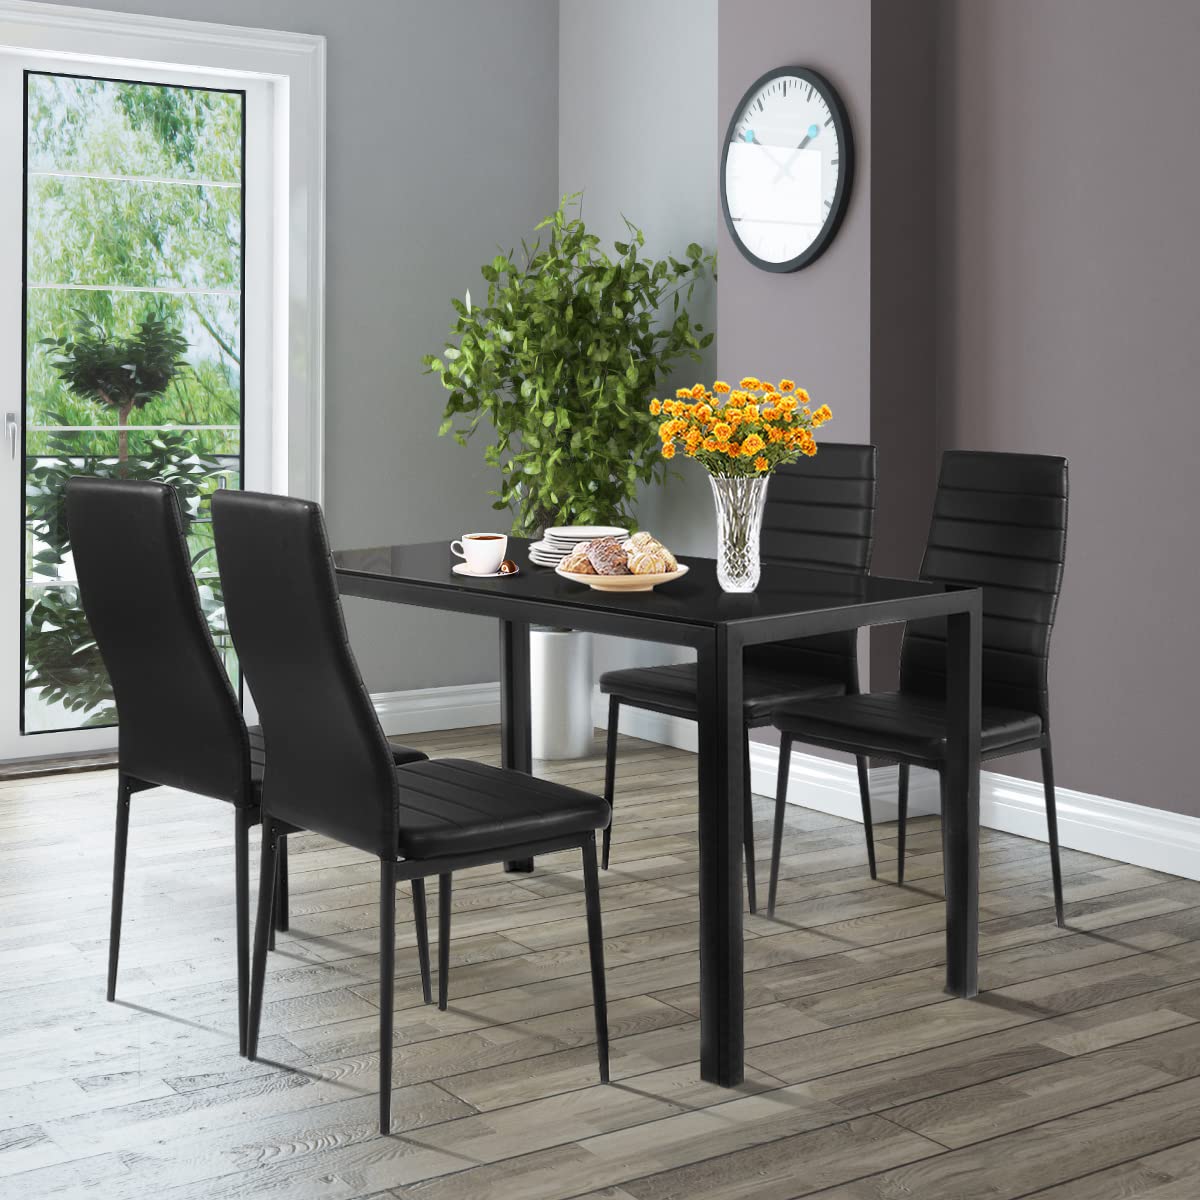 Giantex 5 Pcs Dining Table Set for 4